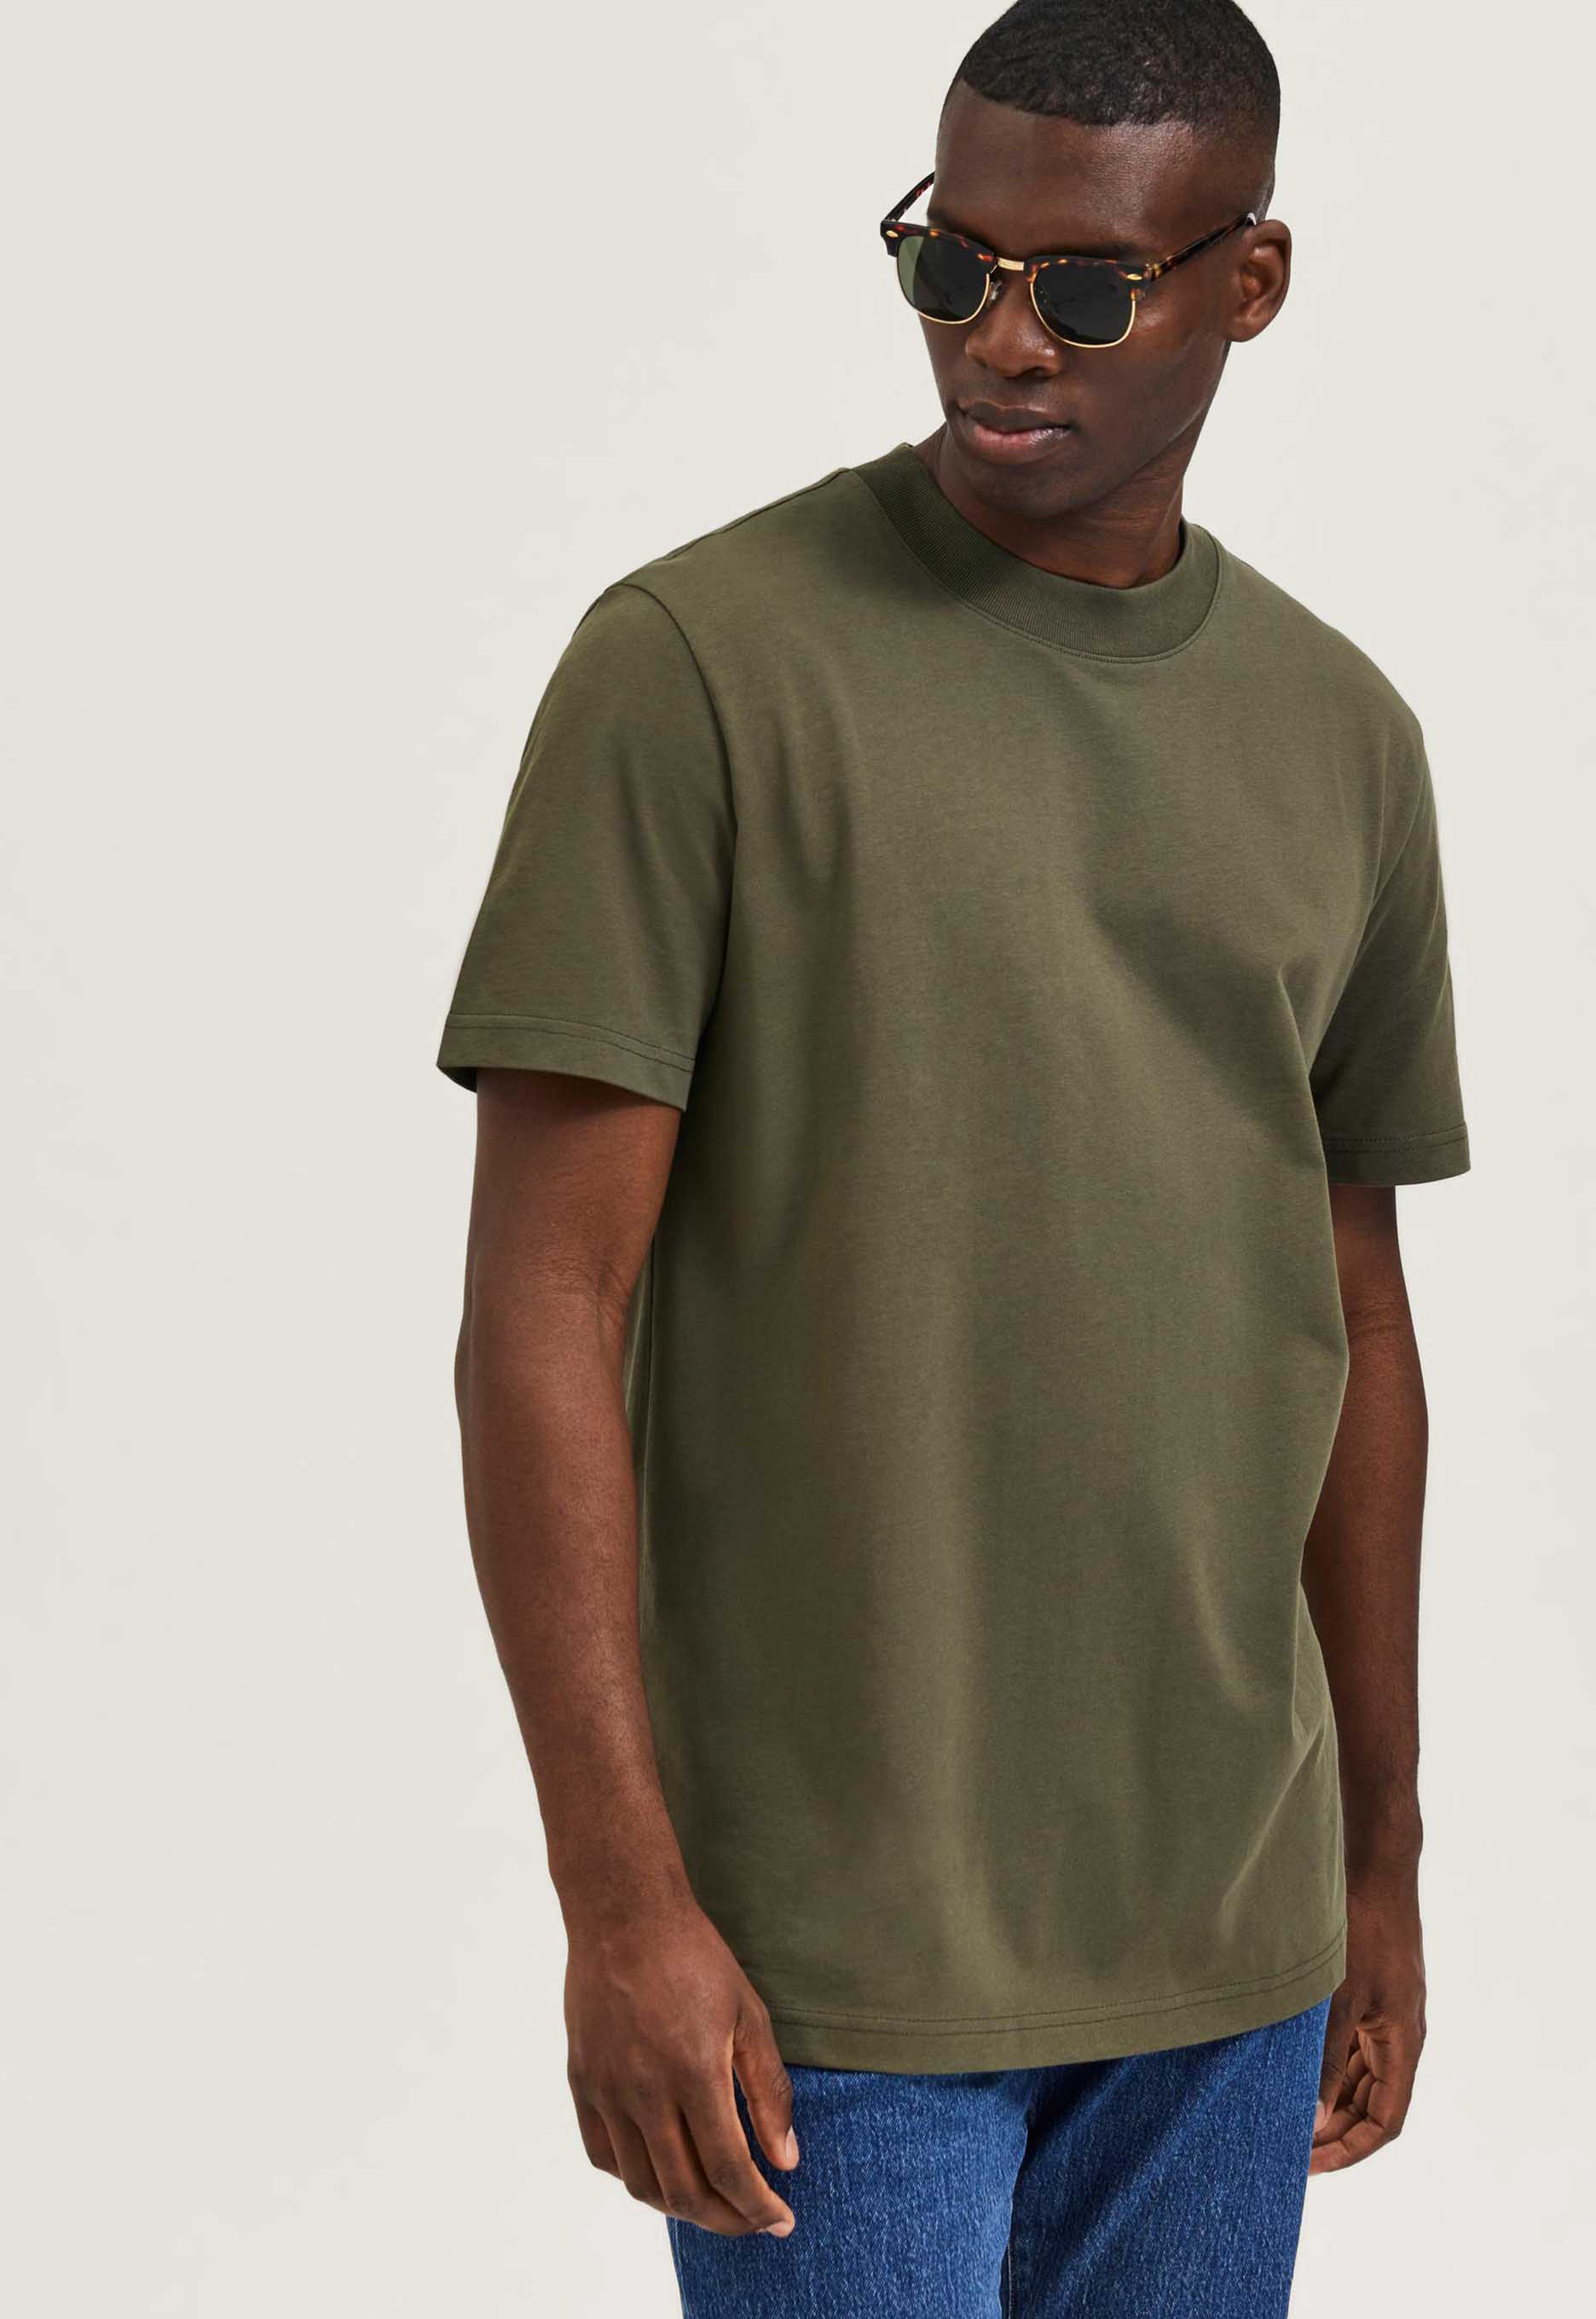 Selected Homme Relax Colman T-shirt